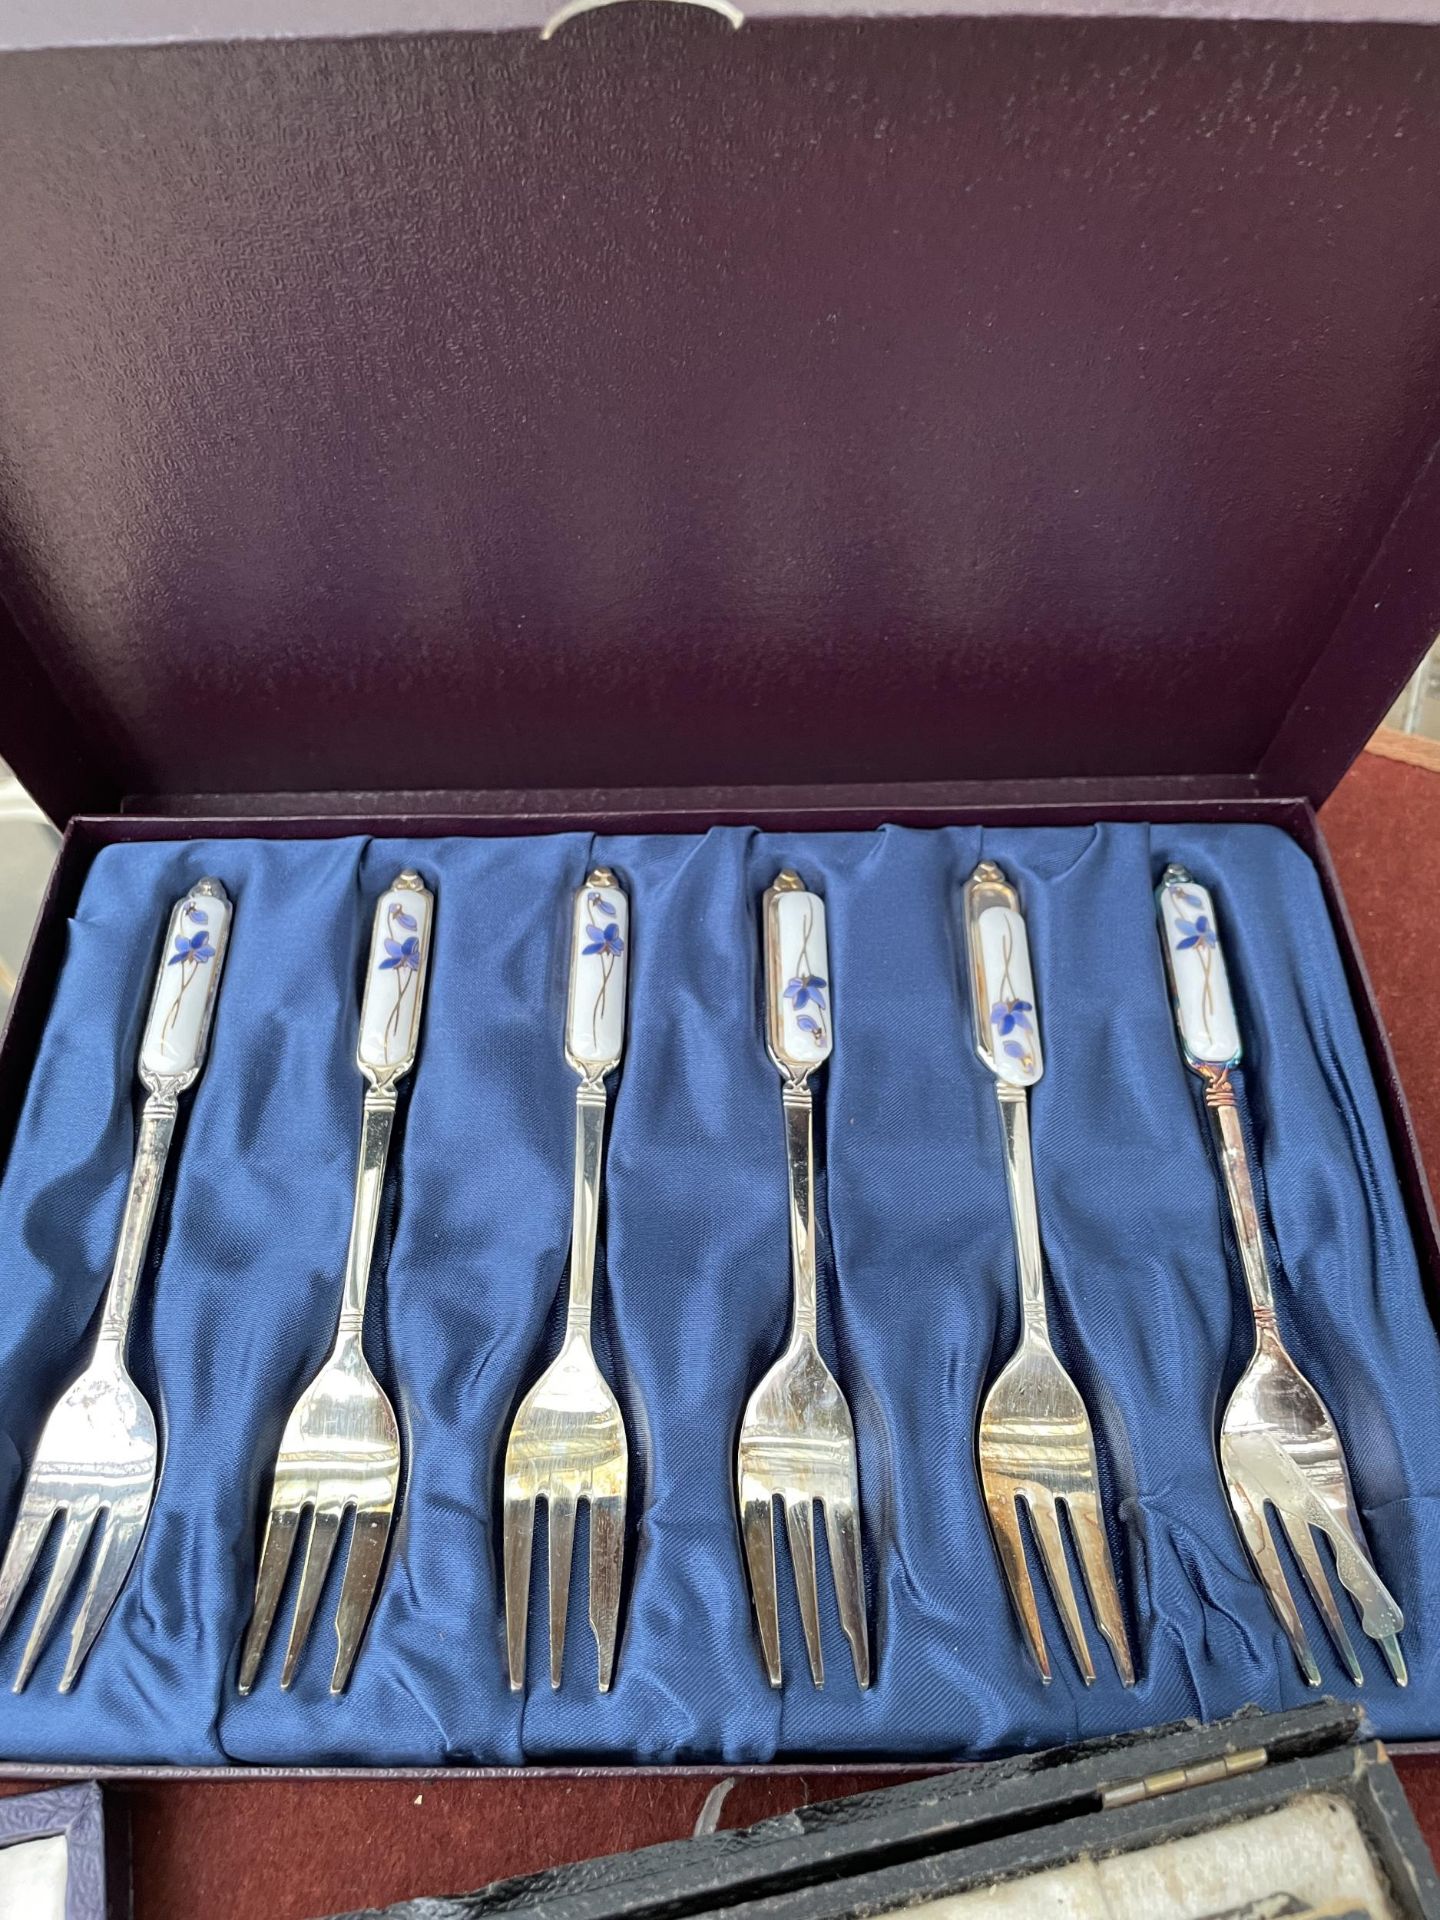 SIX COMPLETE SETS OF CASED FLATWARE TO INCLUDE ANOINTING SPOONS, TEASPOONS AND CAKE FORKS ETC - Image 4 of 5